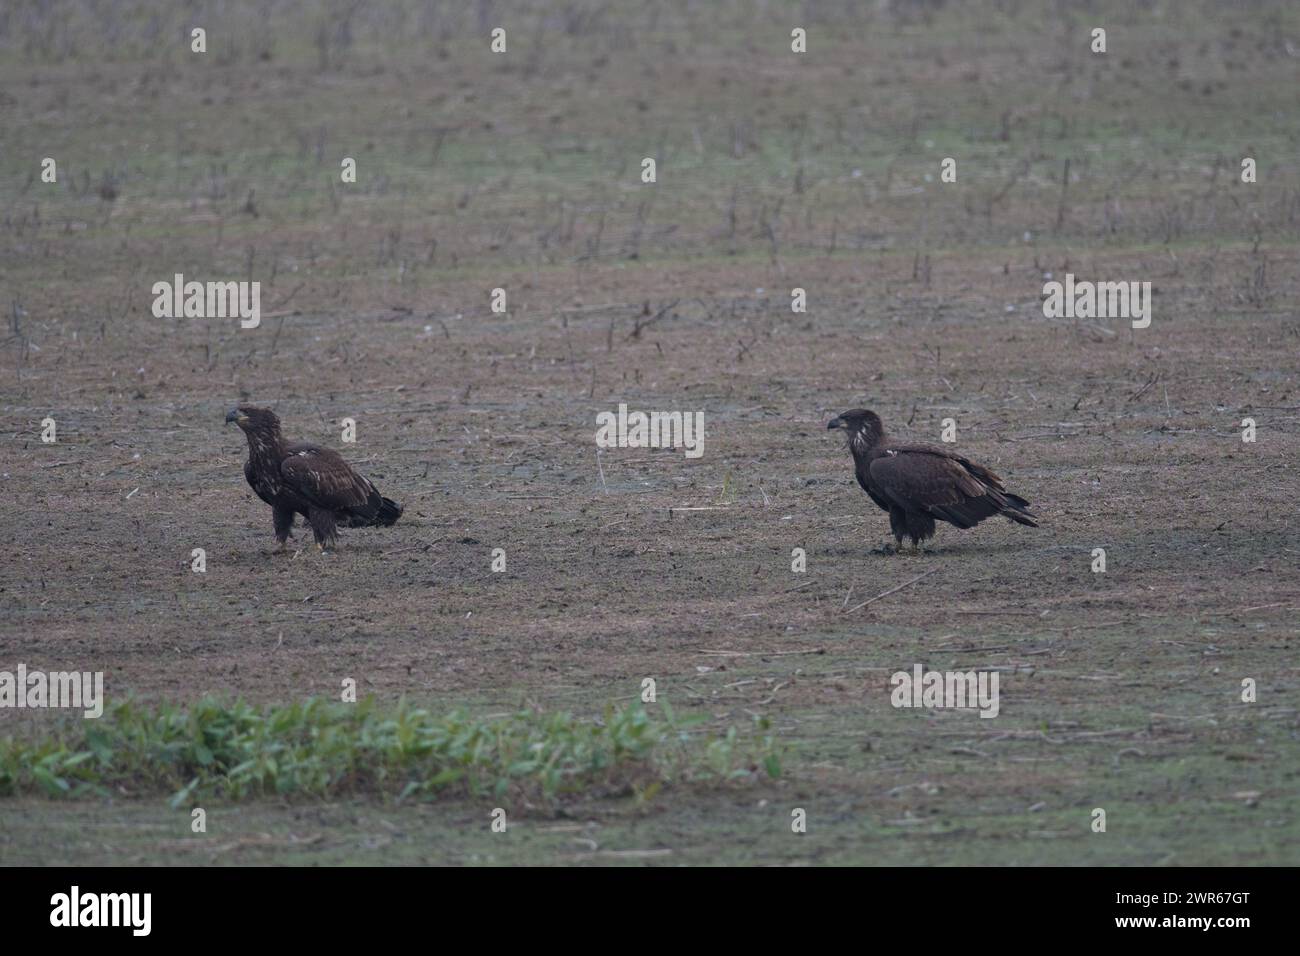 Juvenile bald eagle pair walking on dried wetlands in New York Stock Photo